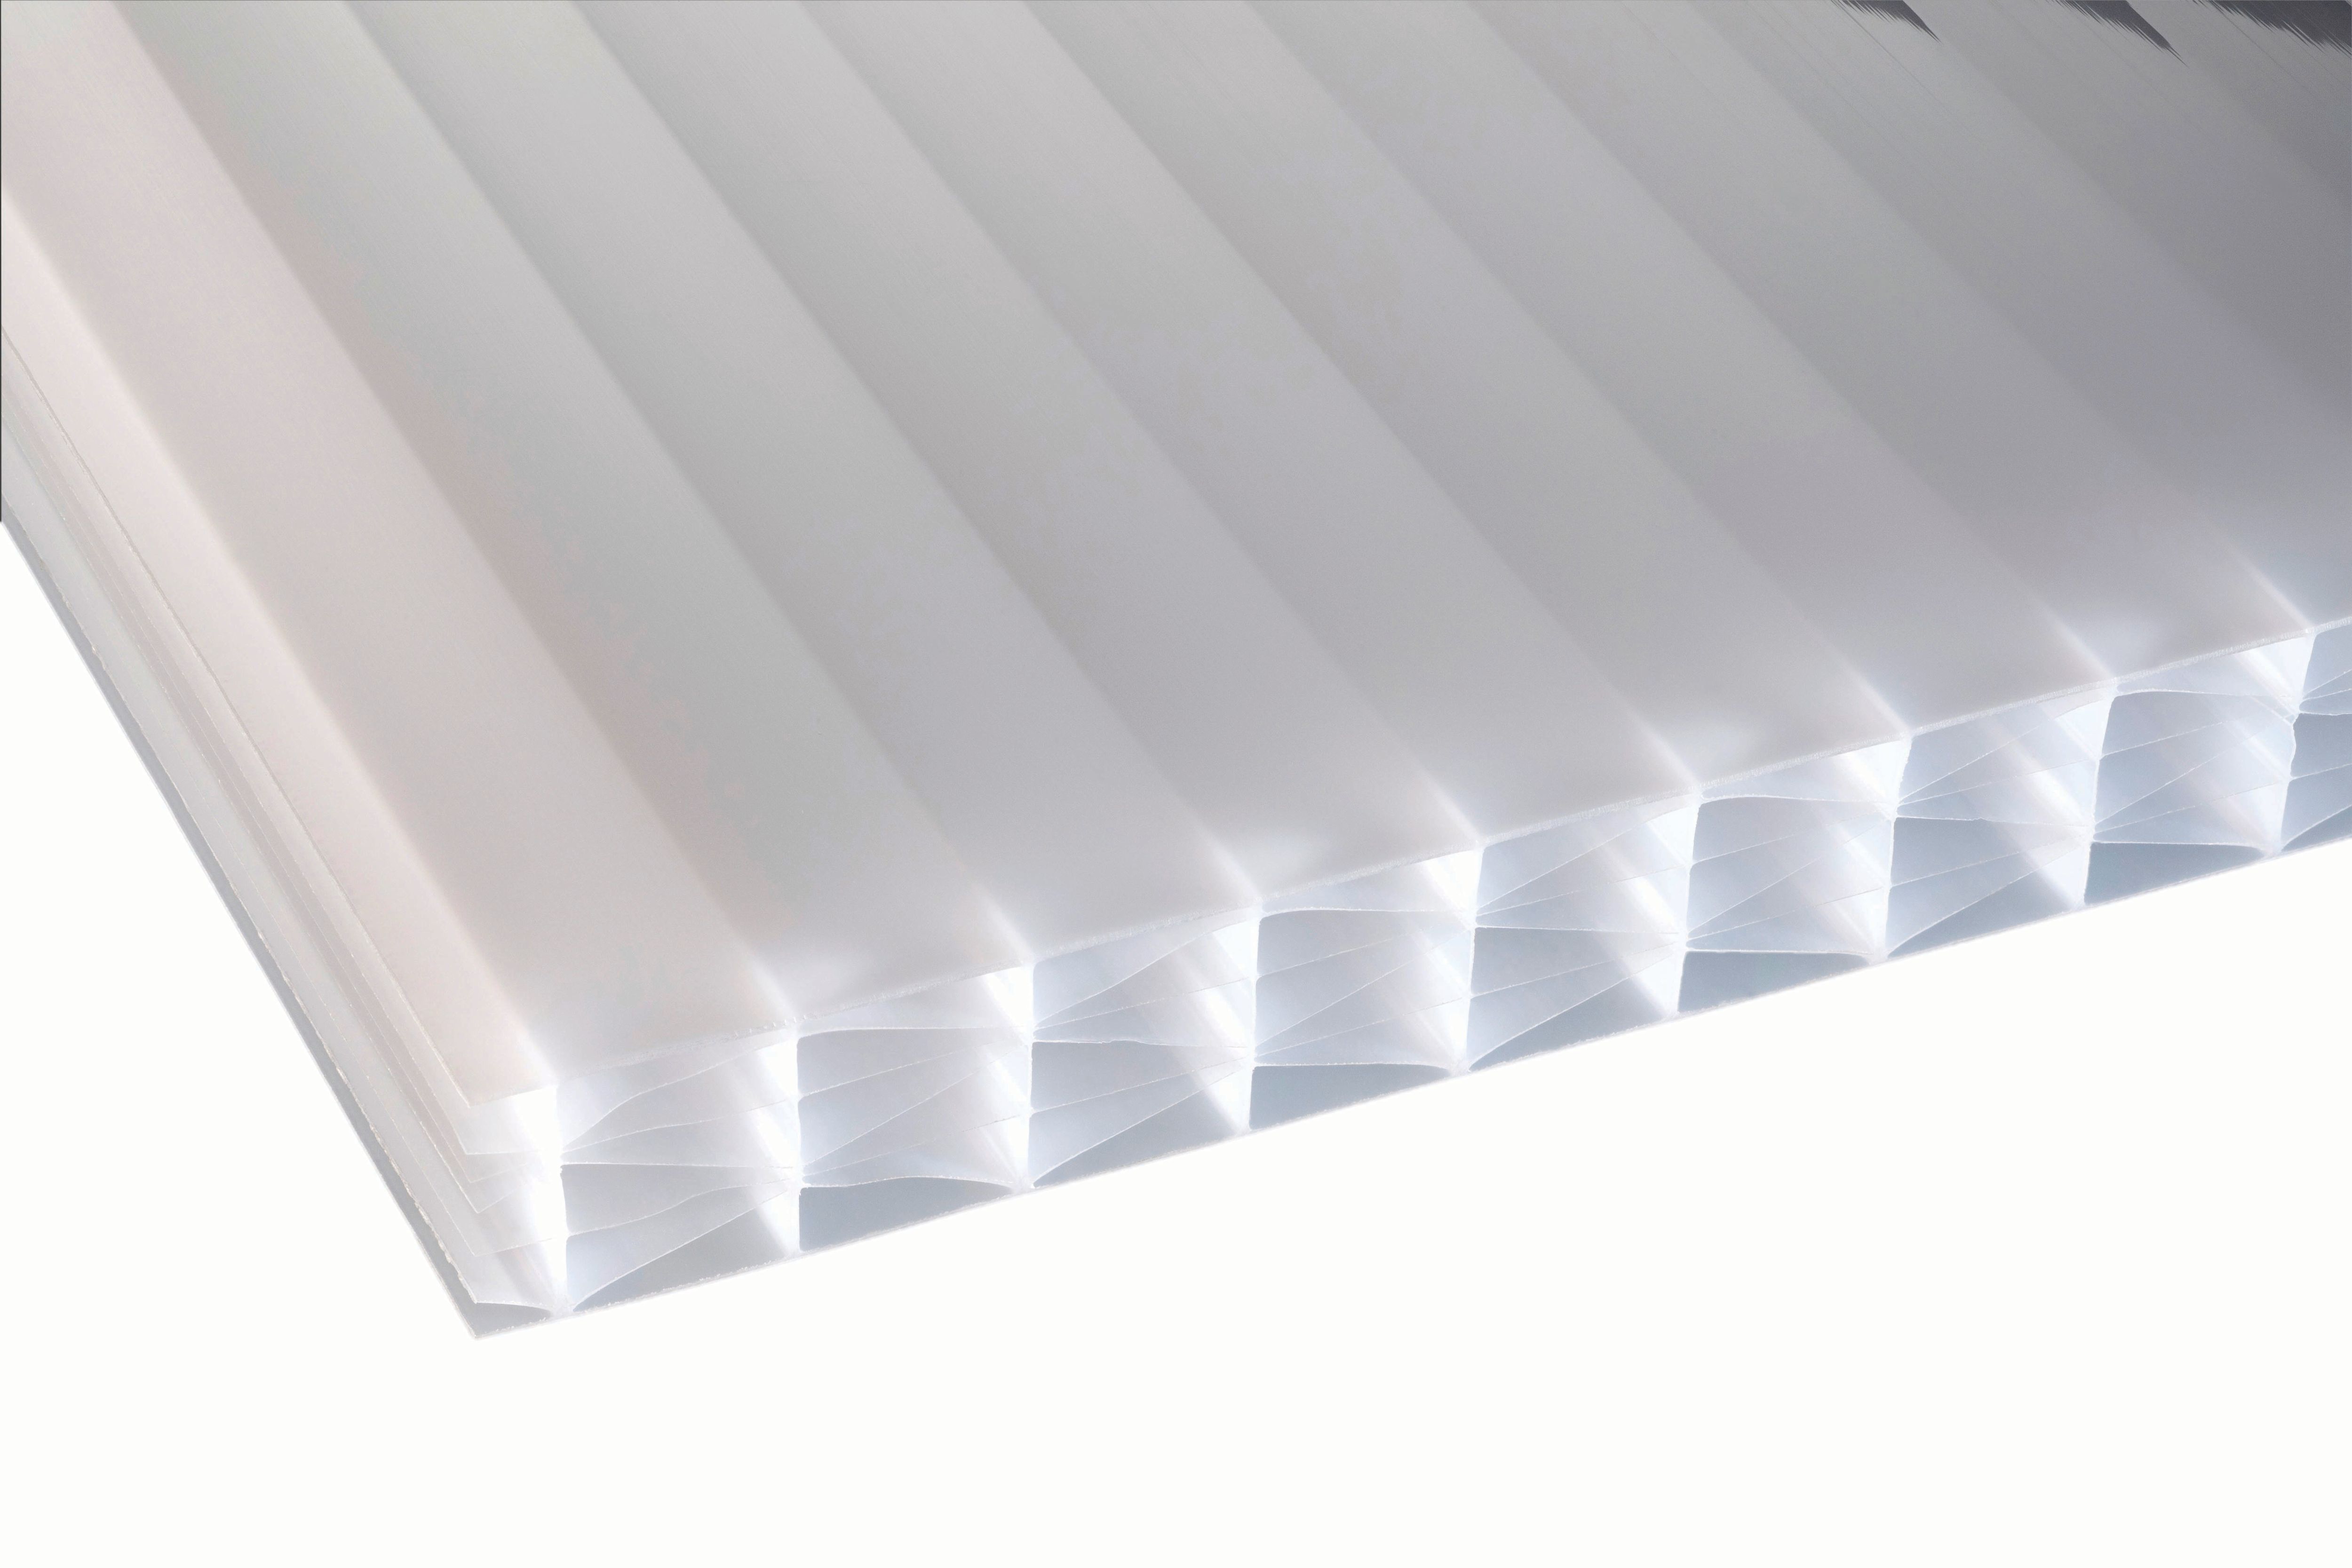 Image of 25mm Opal Multiwall Polycarbonate Sheet - 2000 x 1600mm